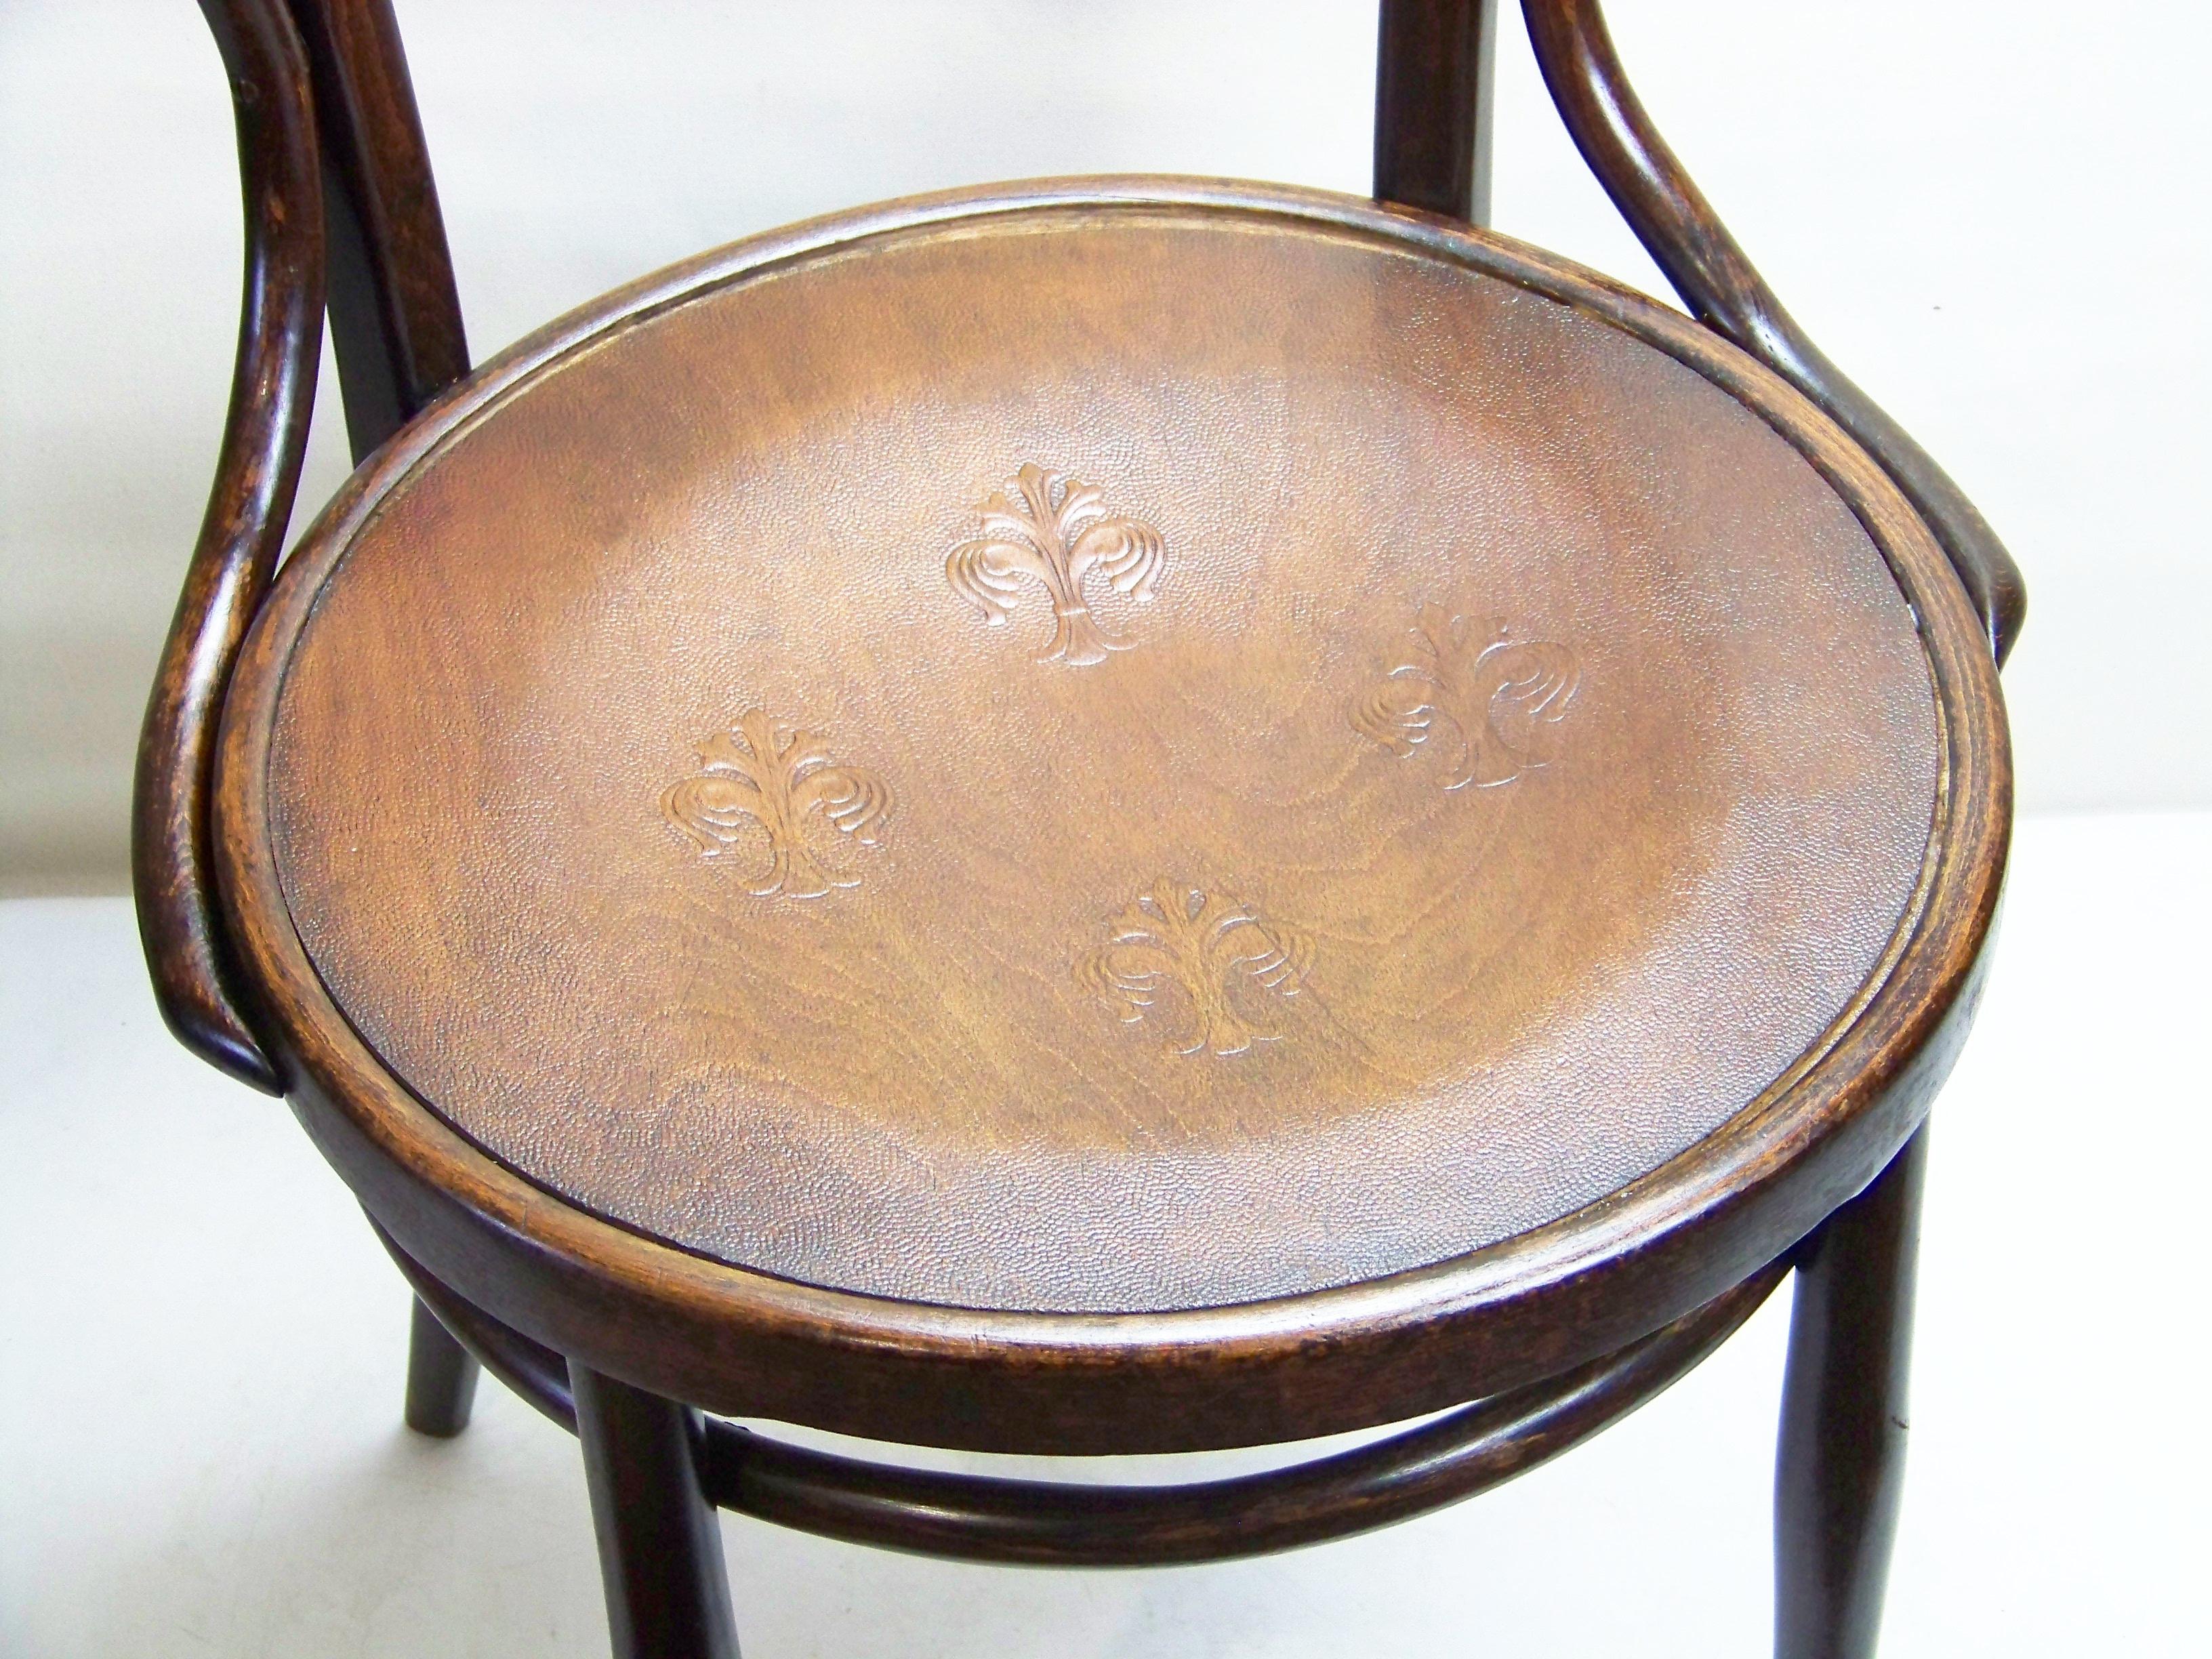 Original state with a pleasant patine of age, perfectly cleaned and re-polished with shelack finish.